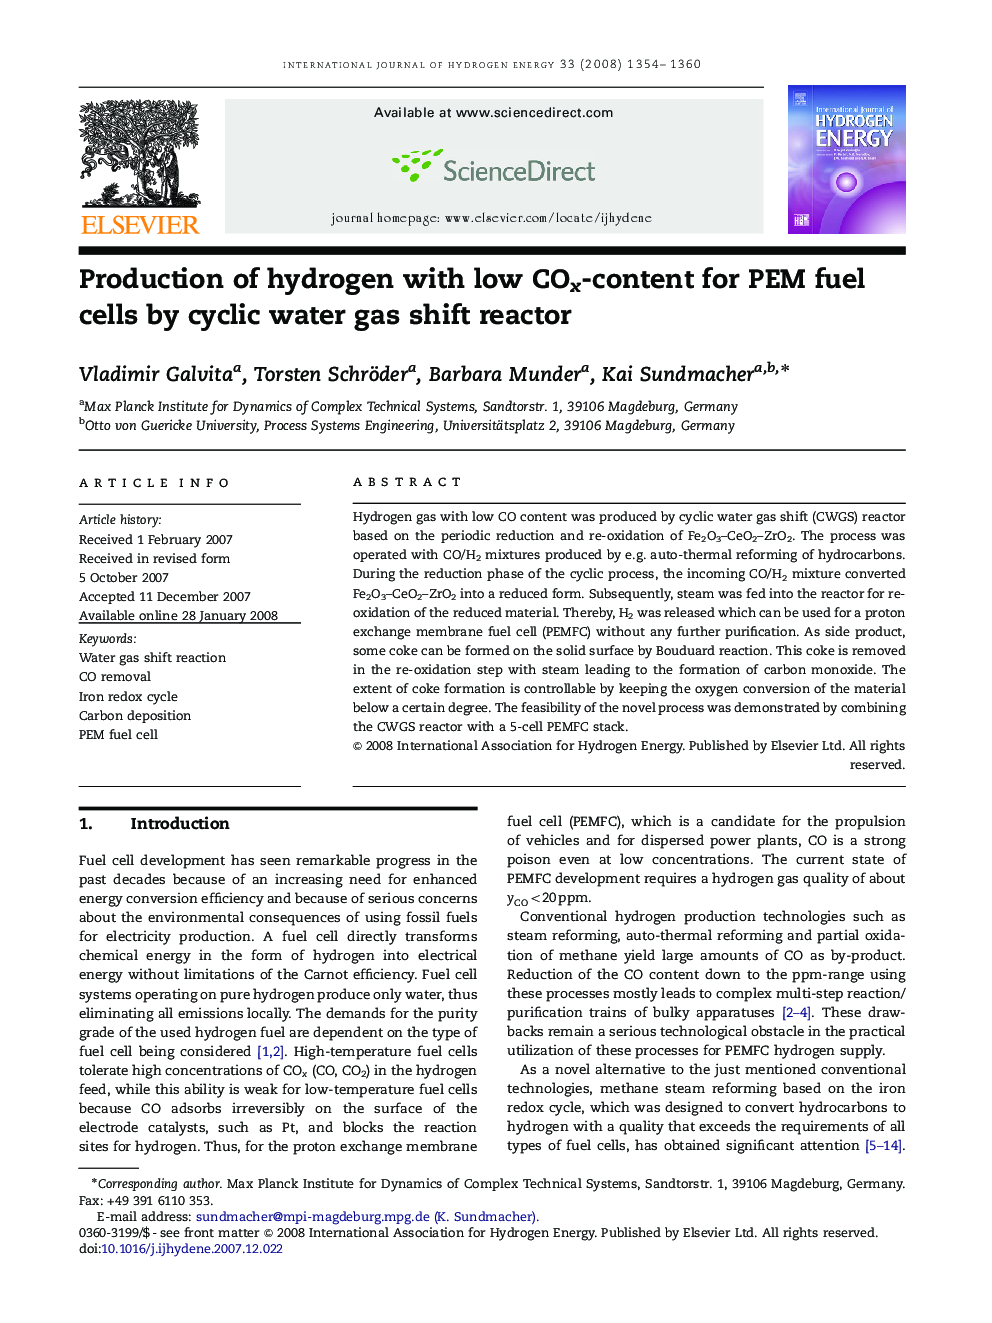 Production of hydrogen with low COx-content for PEM fuel cells by cyclic water gas shift reactor